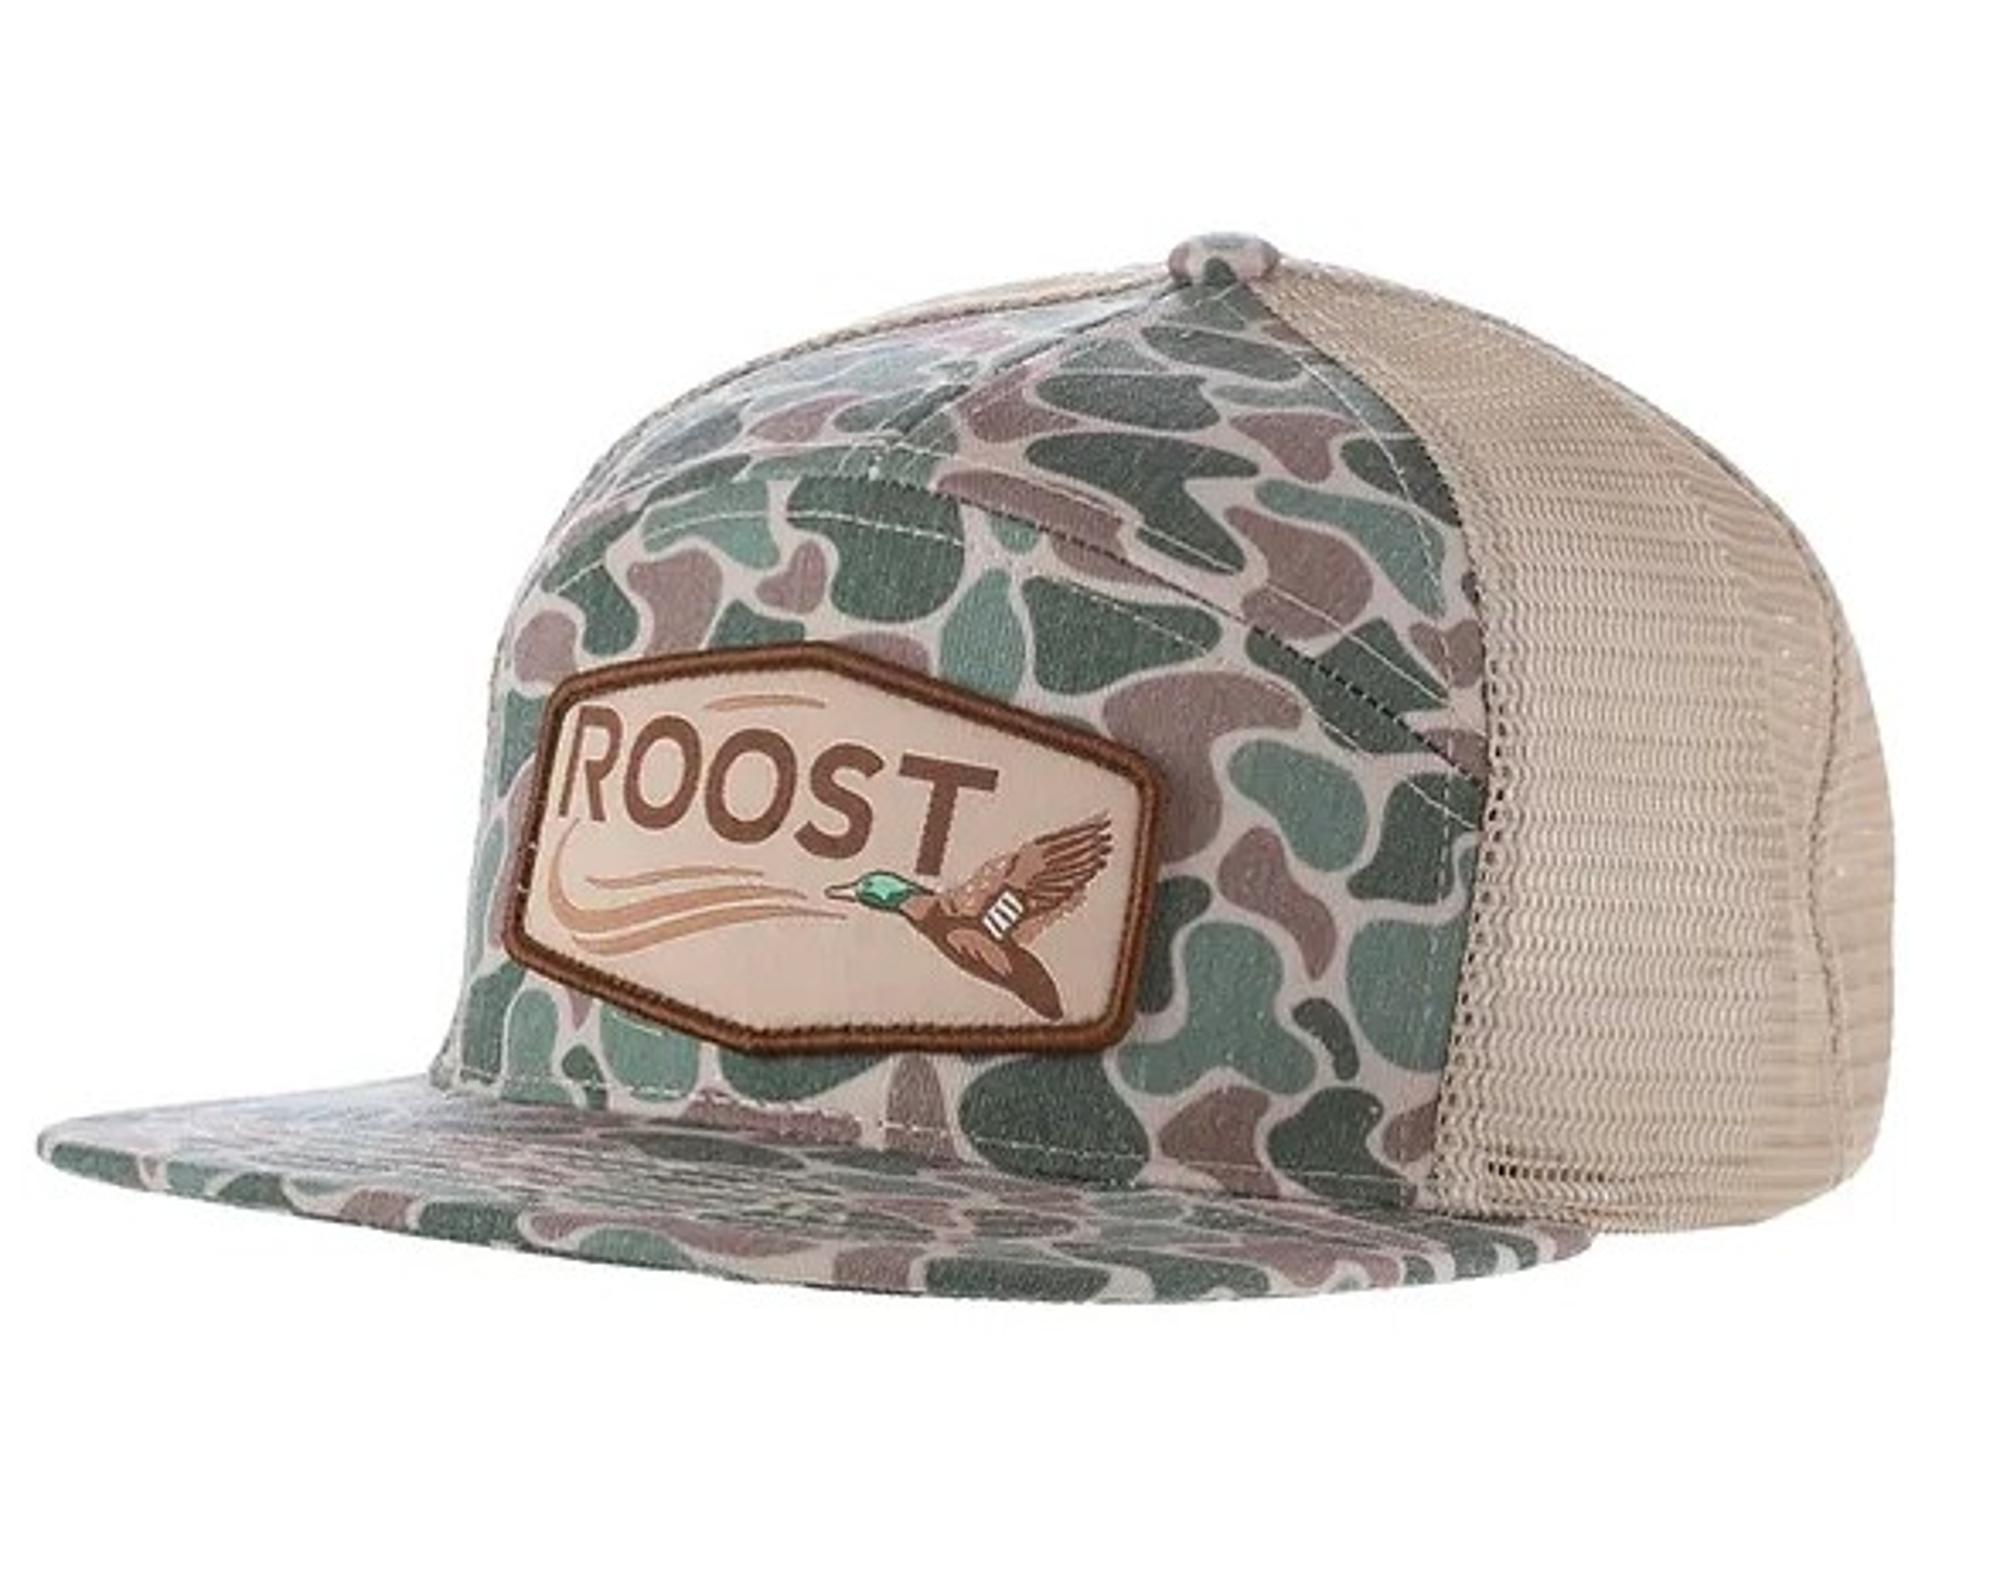 Roost Duck Patch Camo Hat